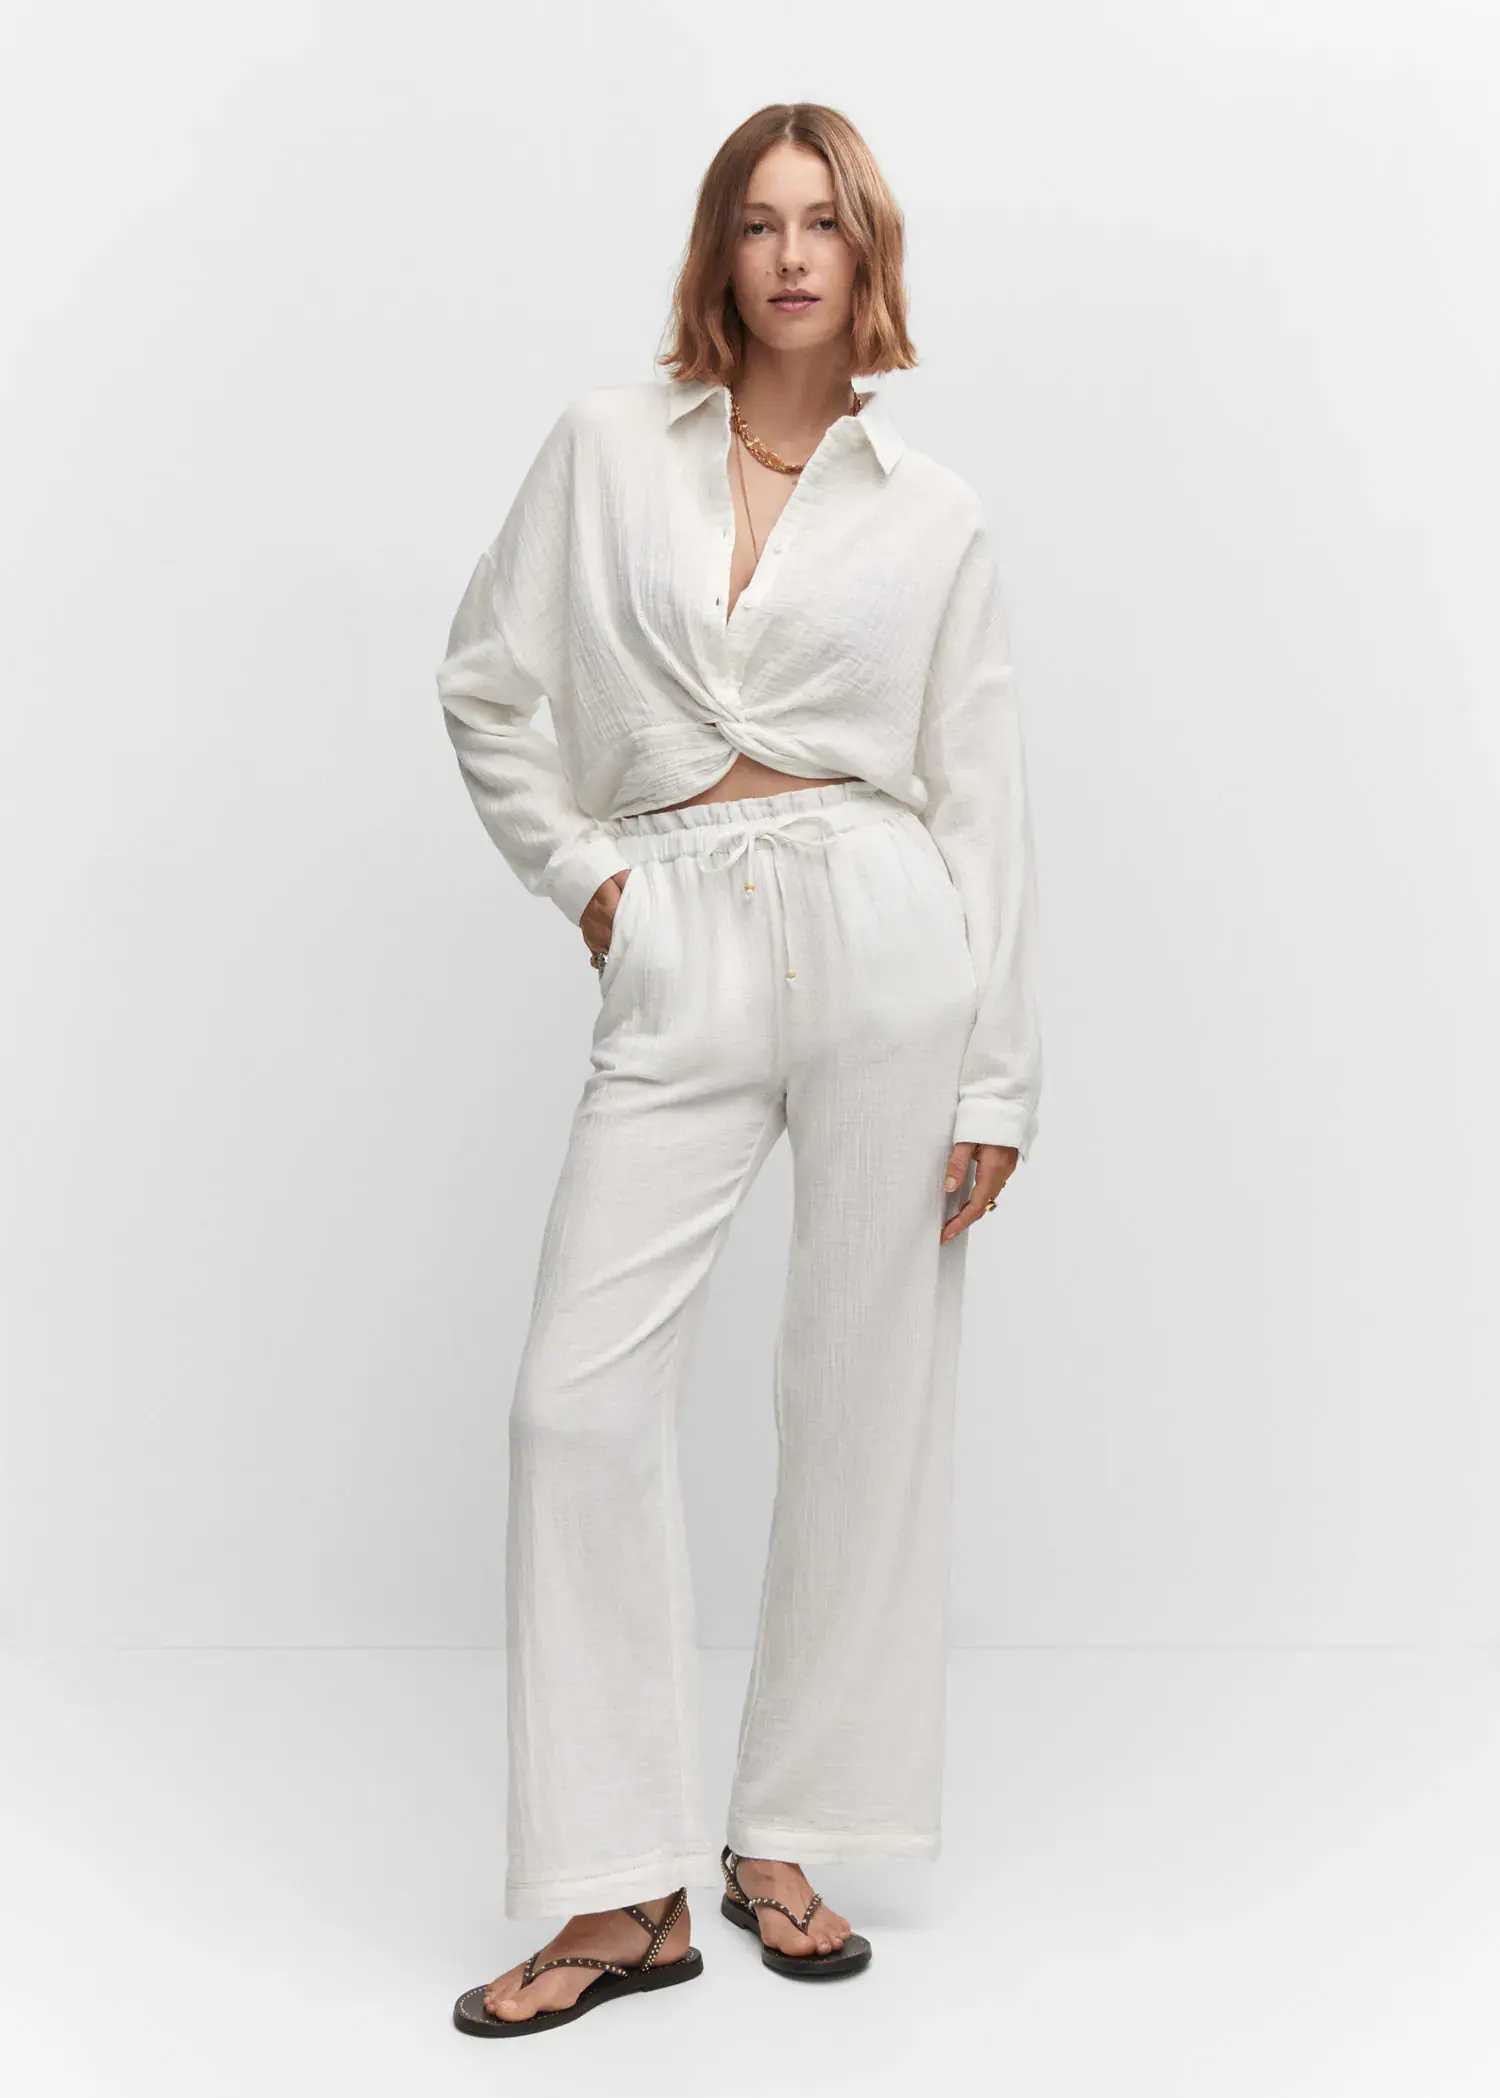 Mango Bow textured pants. a woman in white shirt and pants standing in a room. 